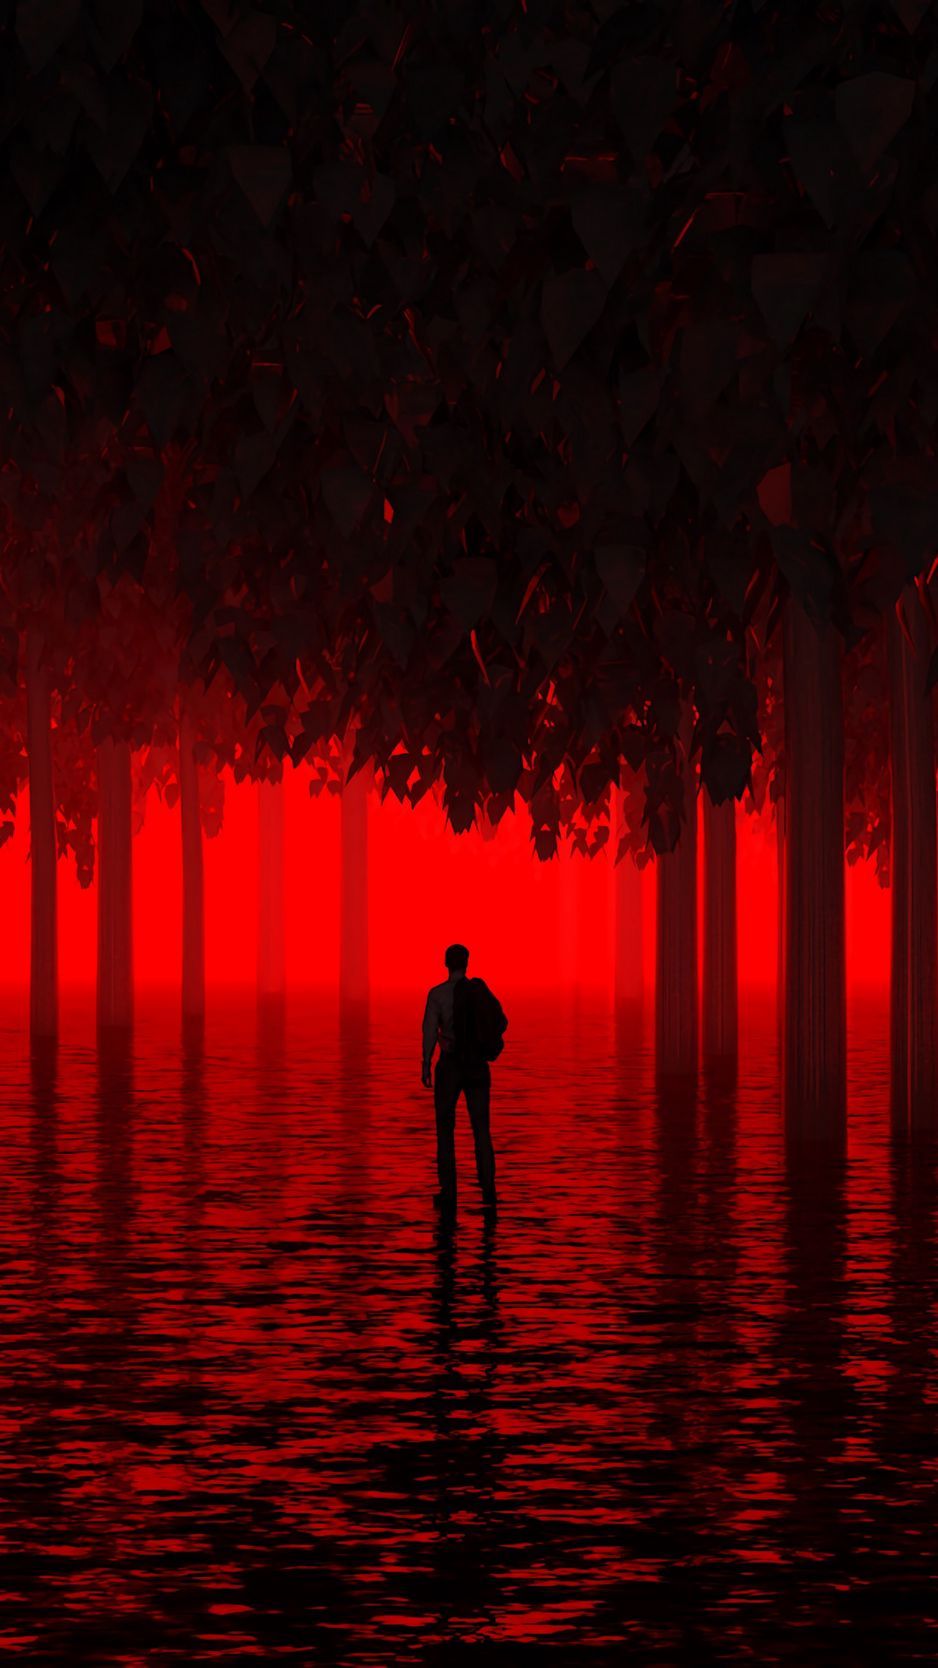 A man standing in the water with trees behind him - Light red